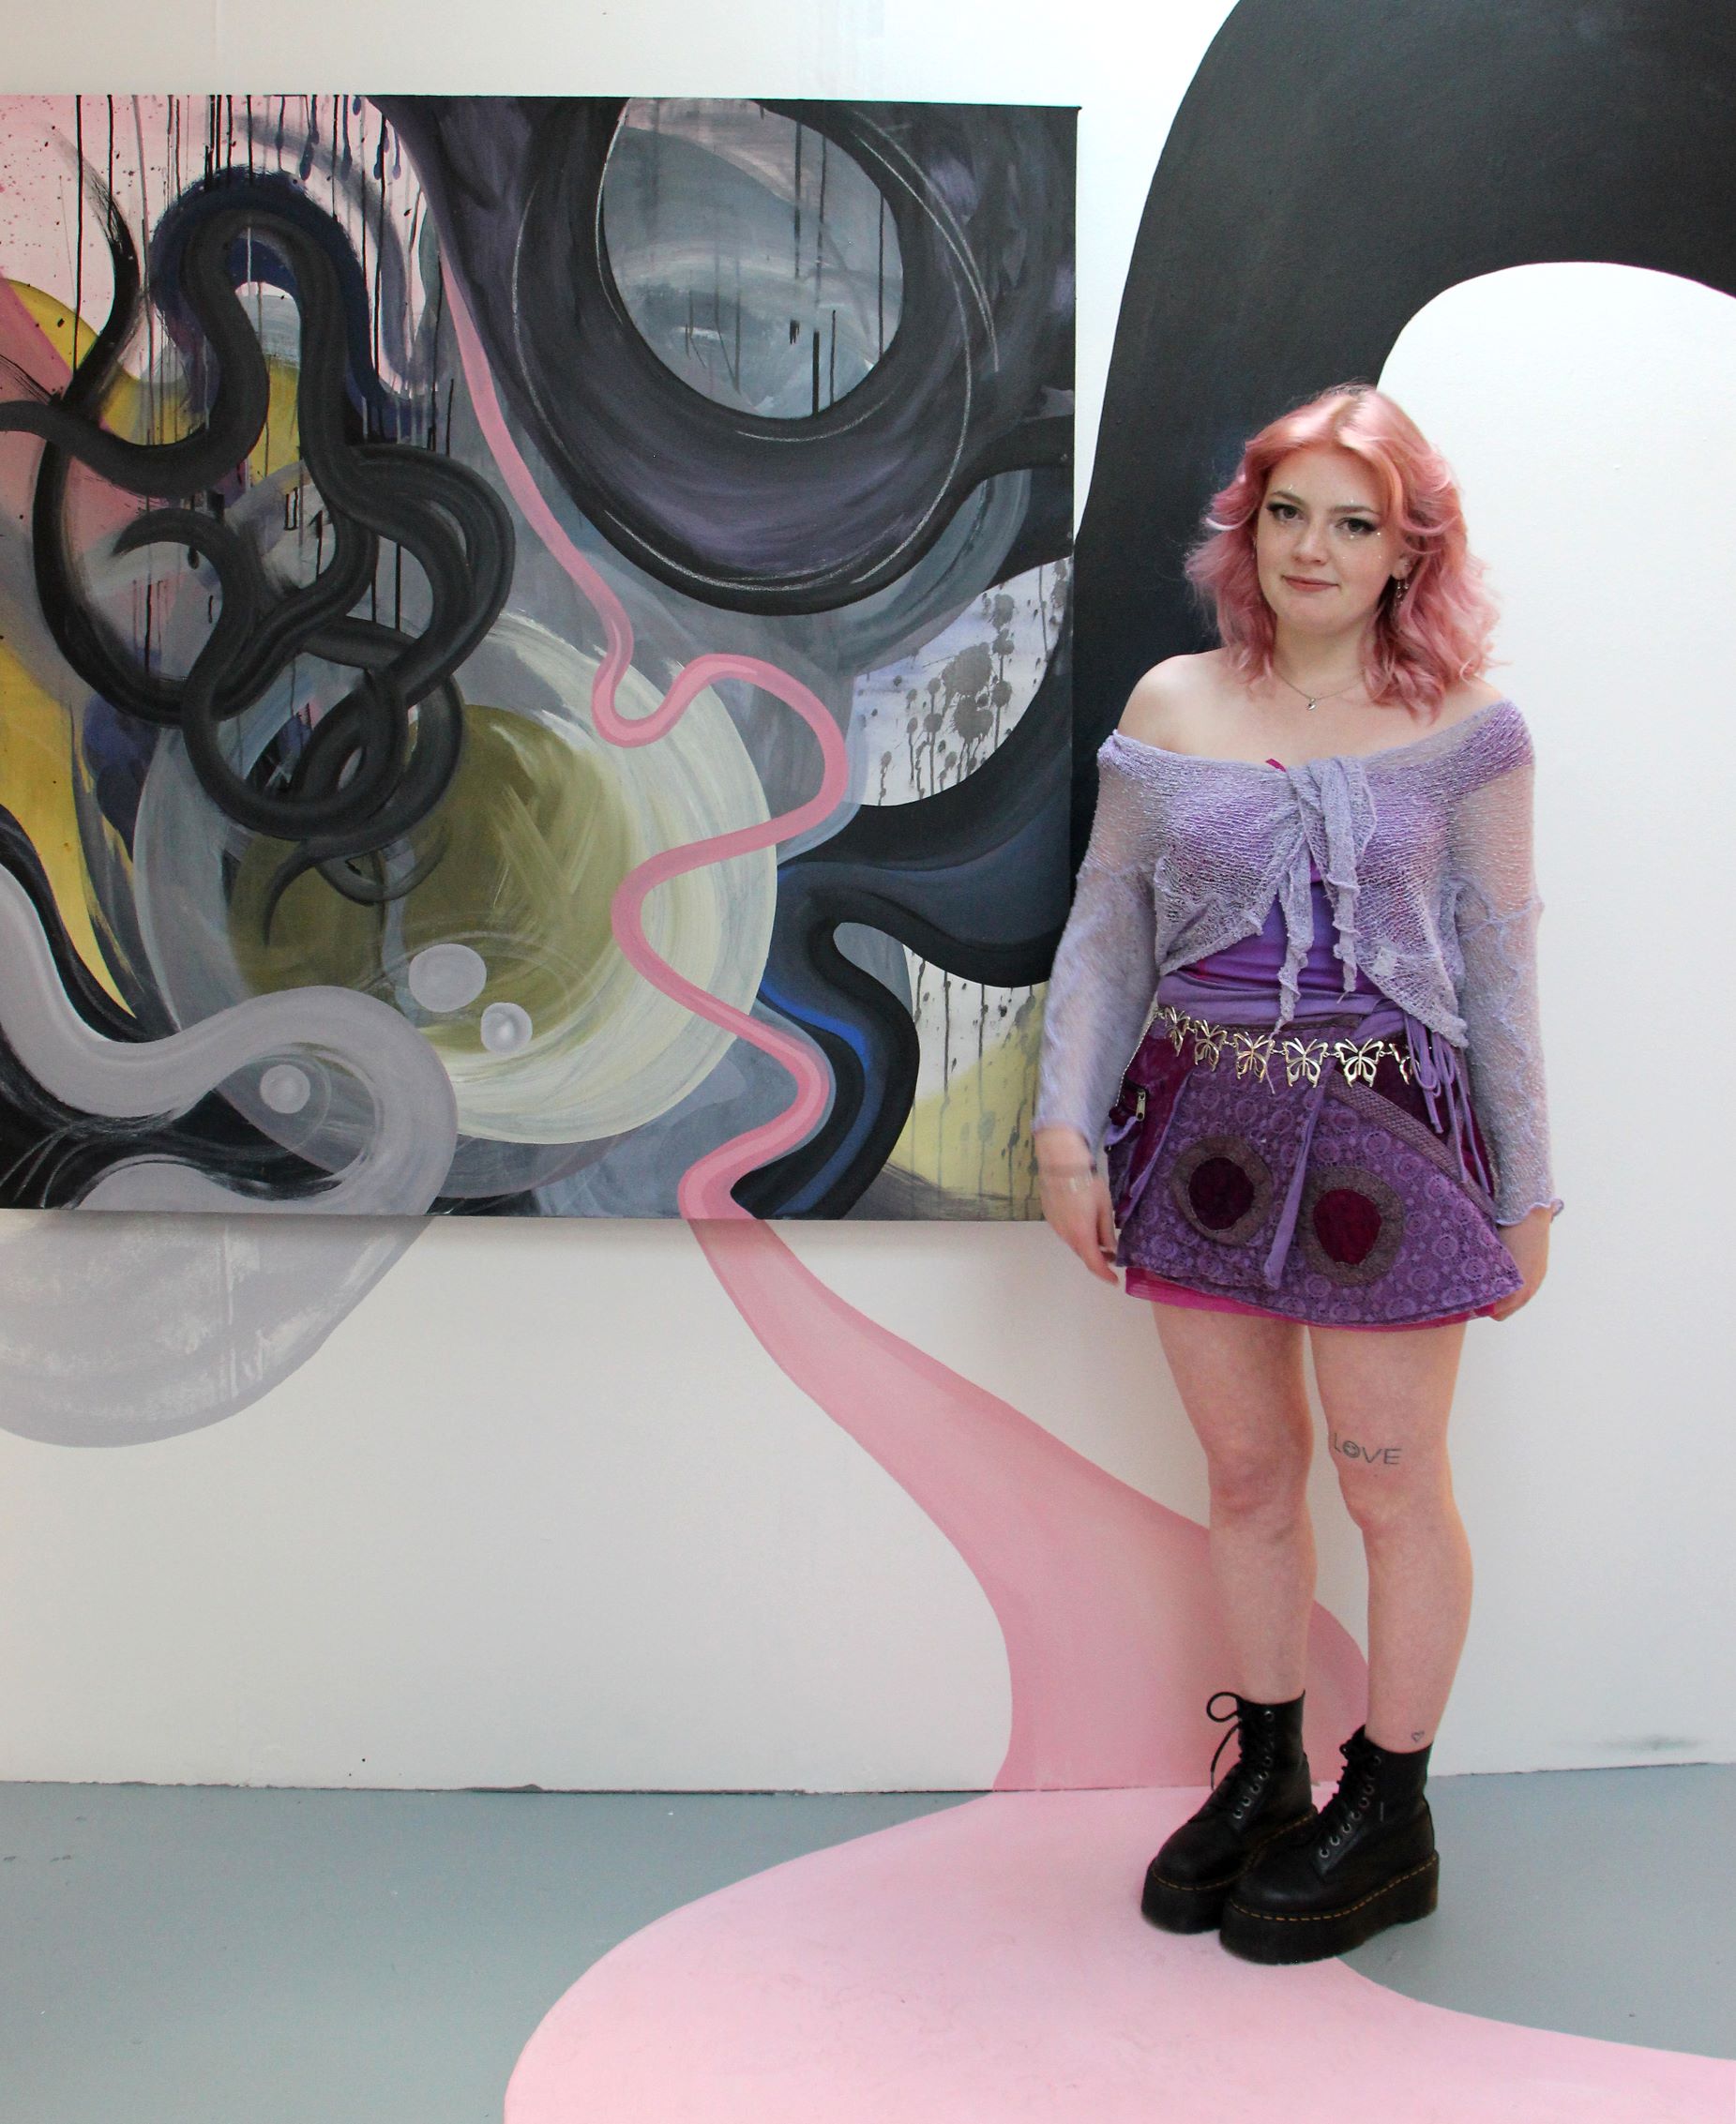 Student poses with artwork